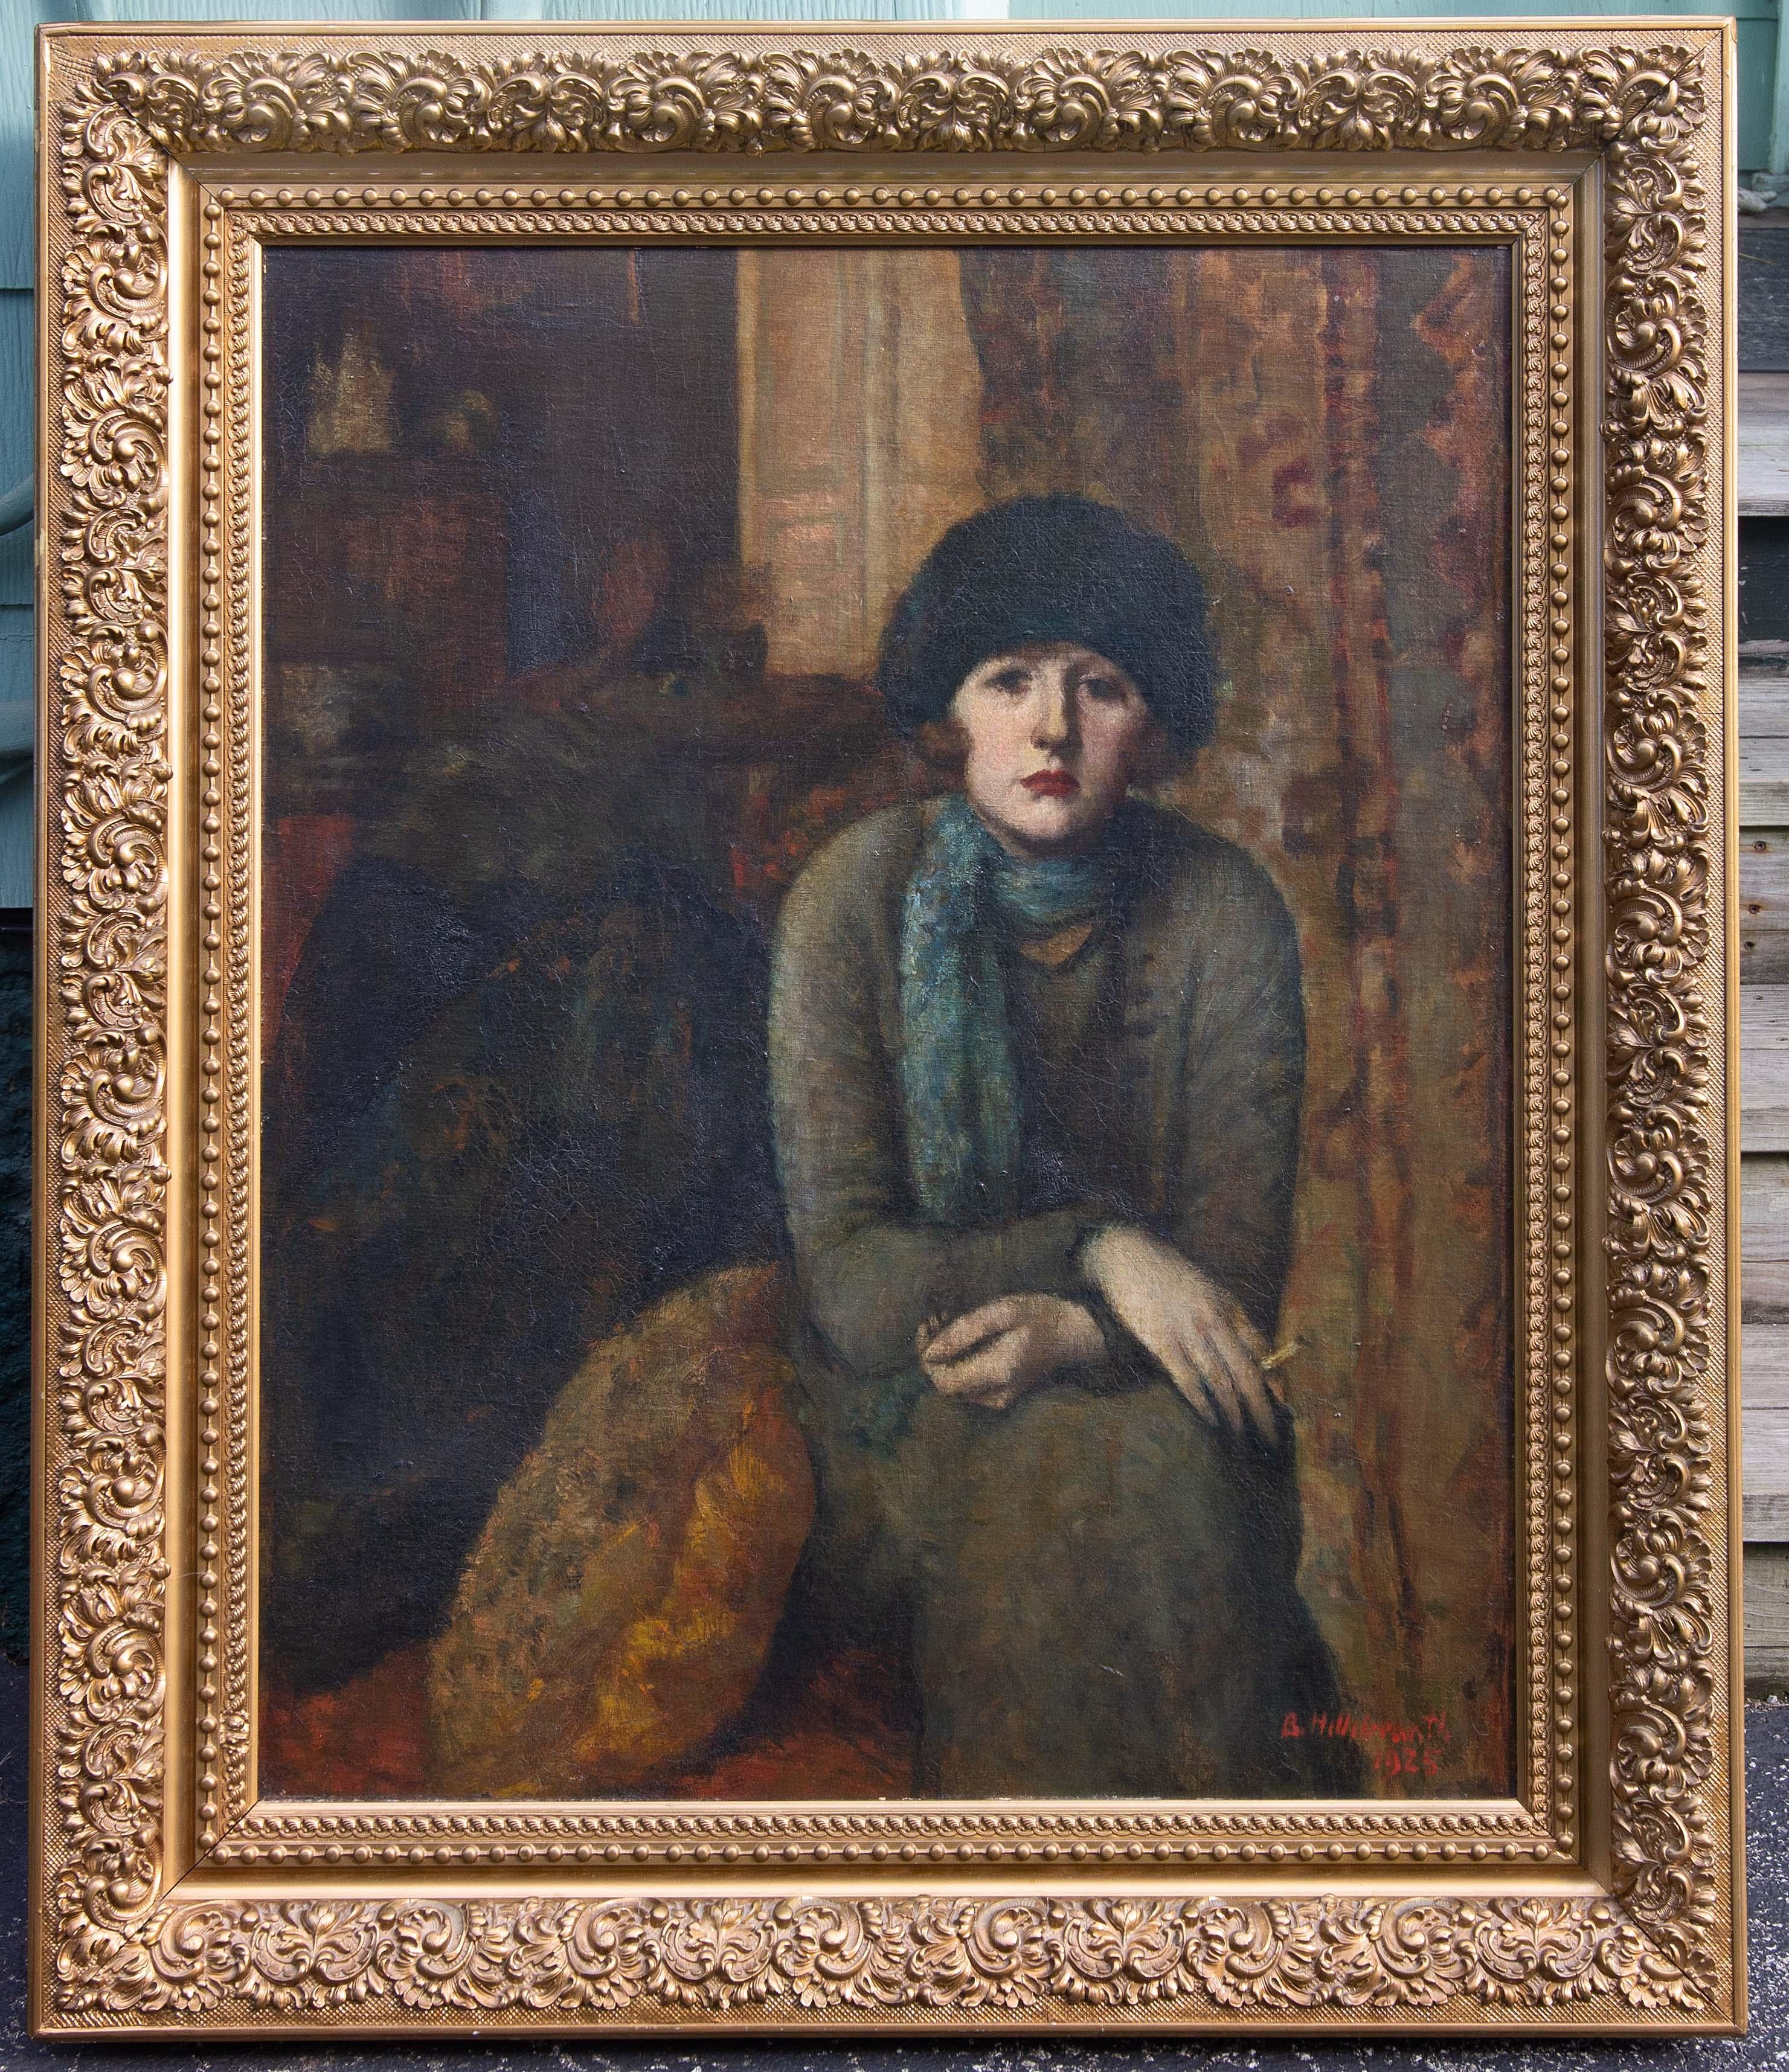 Bohemian woman Budapest, Hungary 1925 by Bertha De Hellebranth. Fabulous period painting brings to life the bohemian intelligentsia of Europe in the 1920's. I believe the painting is of the artists sister Elena Maria De Hellebranth. Both sisters